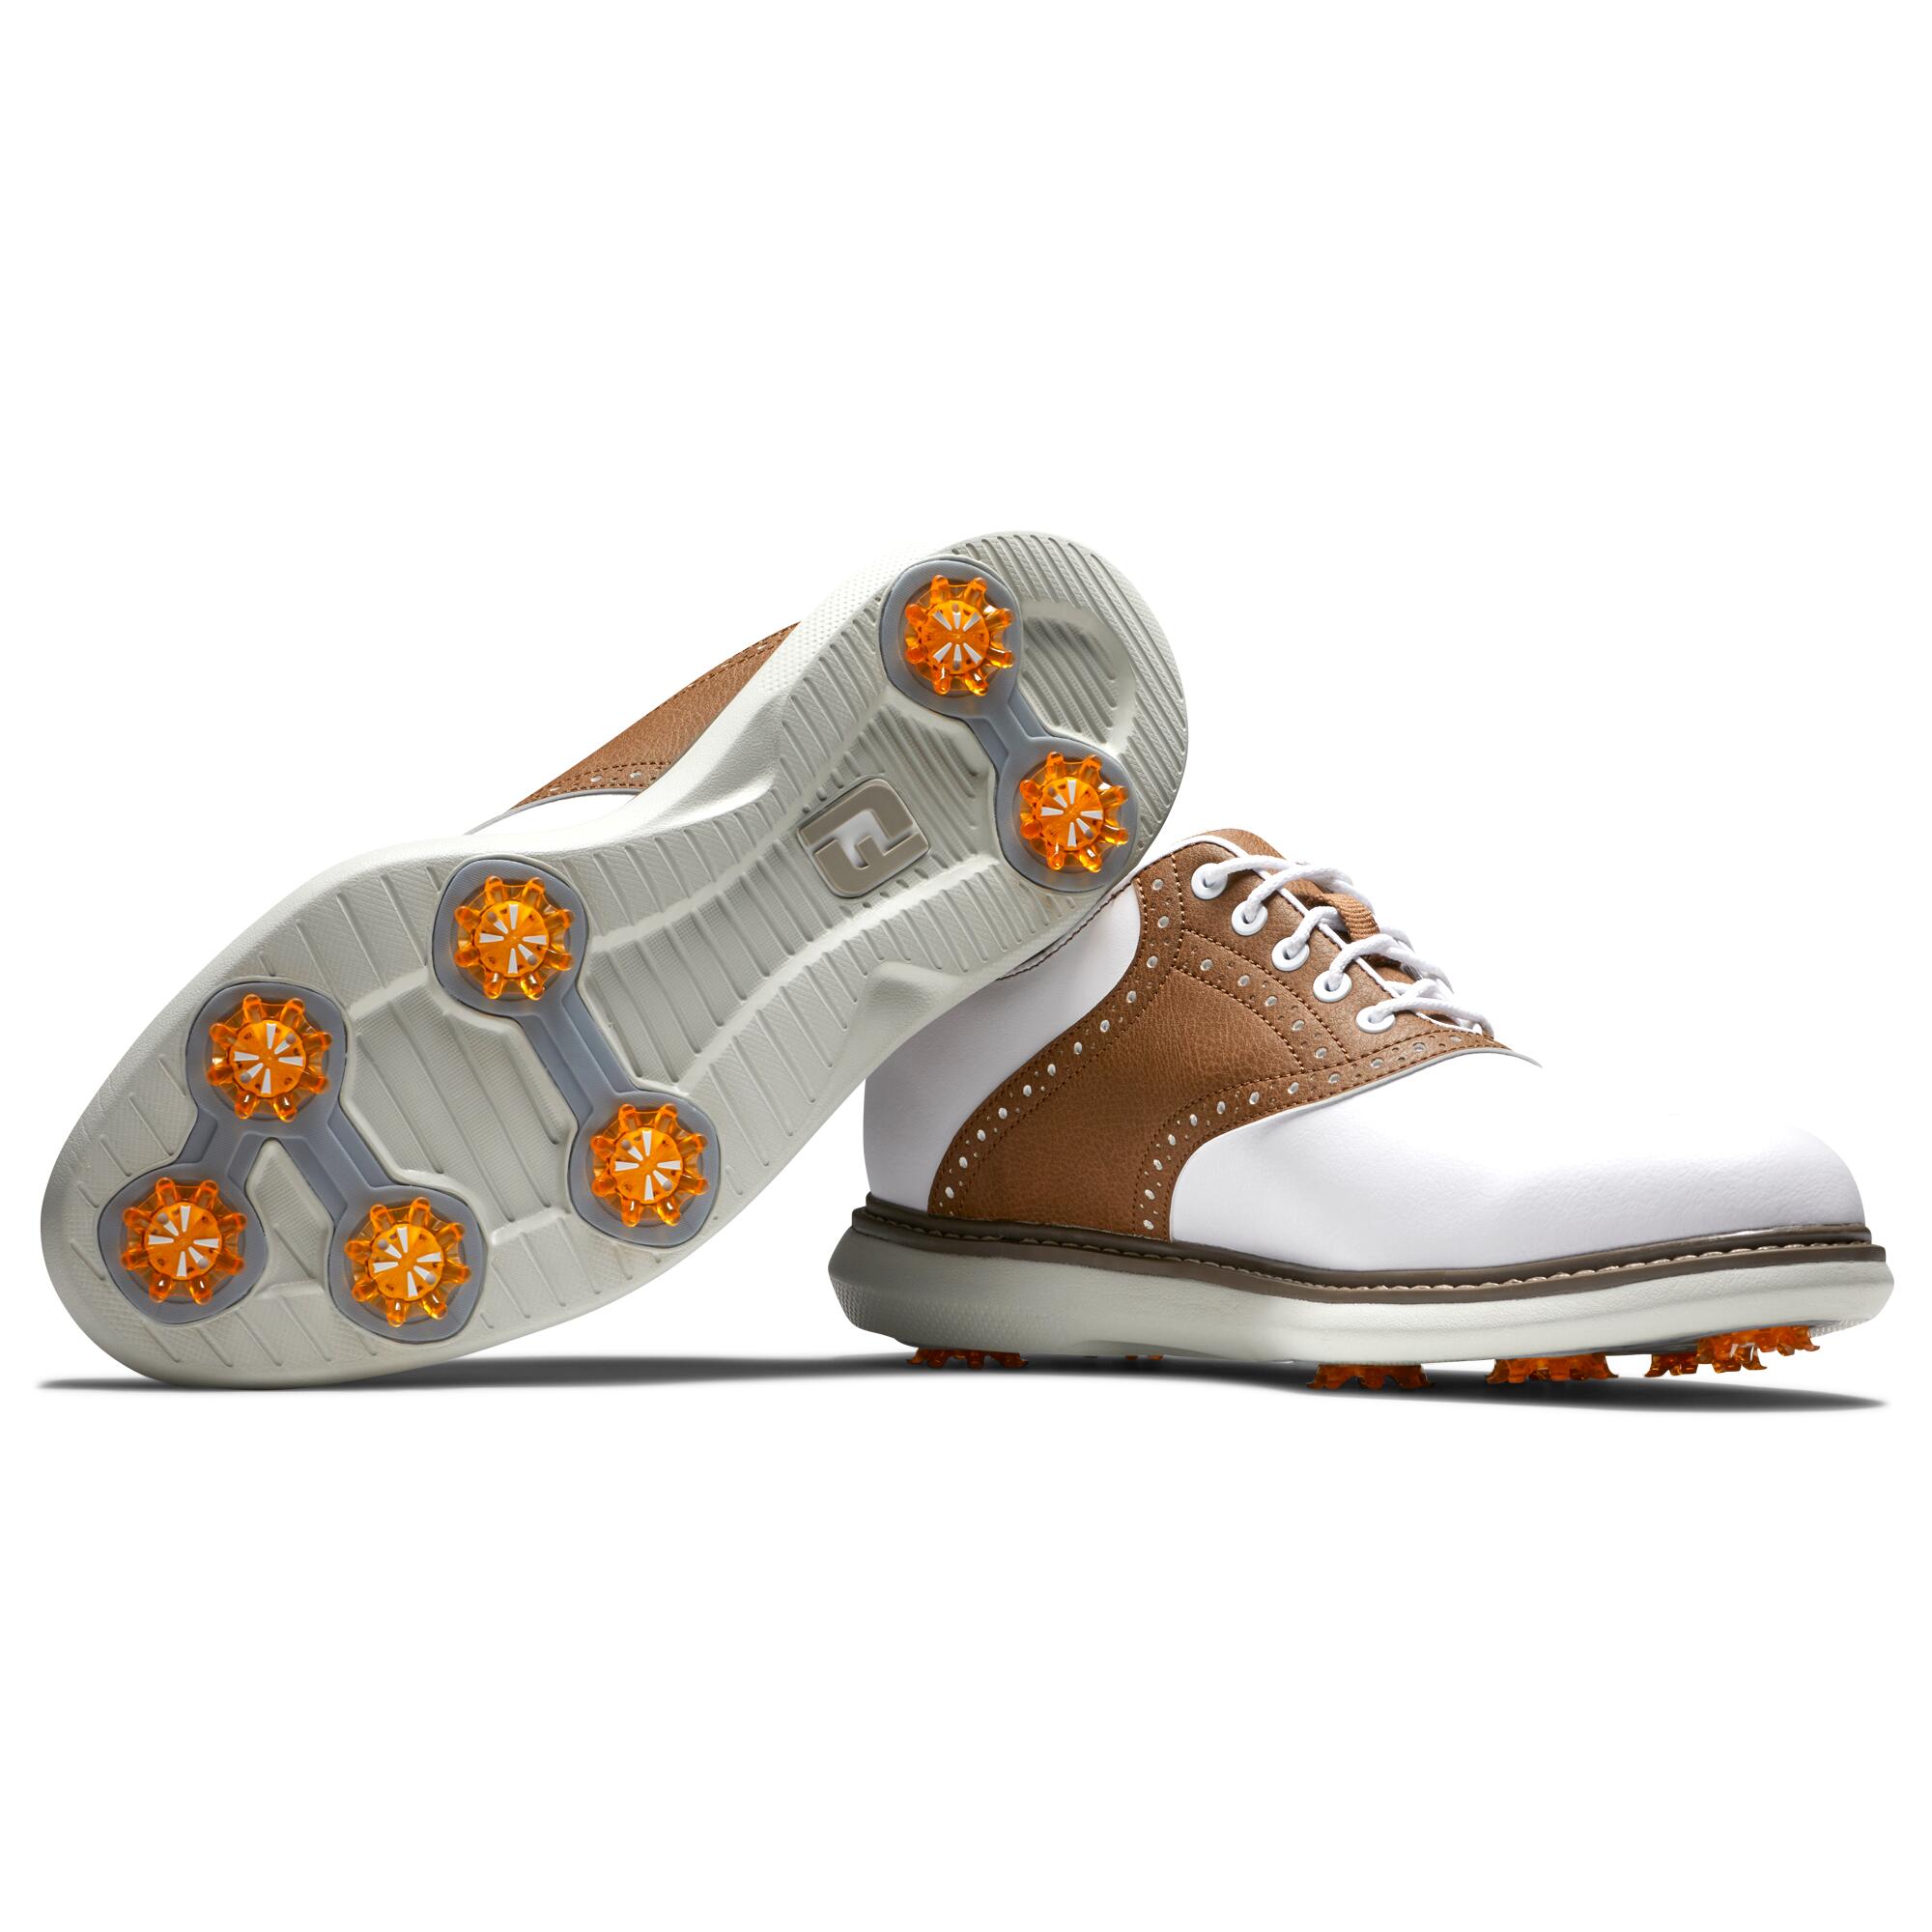 Men's golf shoes Footjoy Traditions - white and brown 6/7